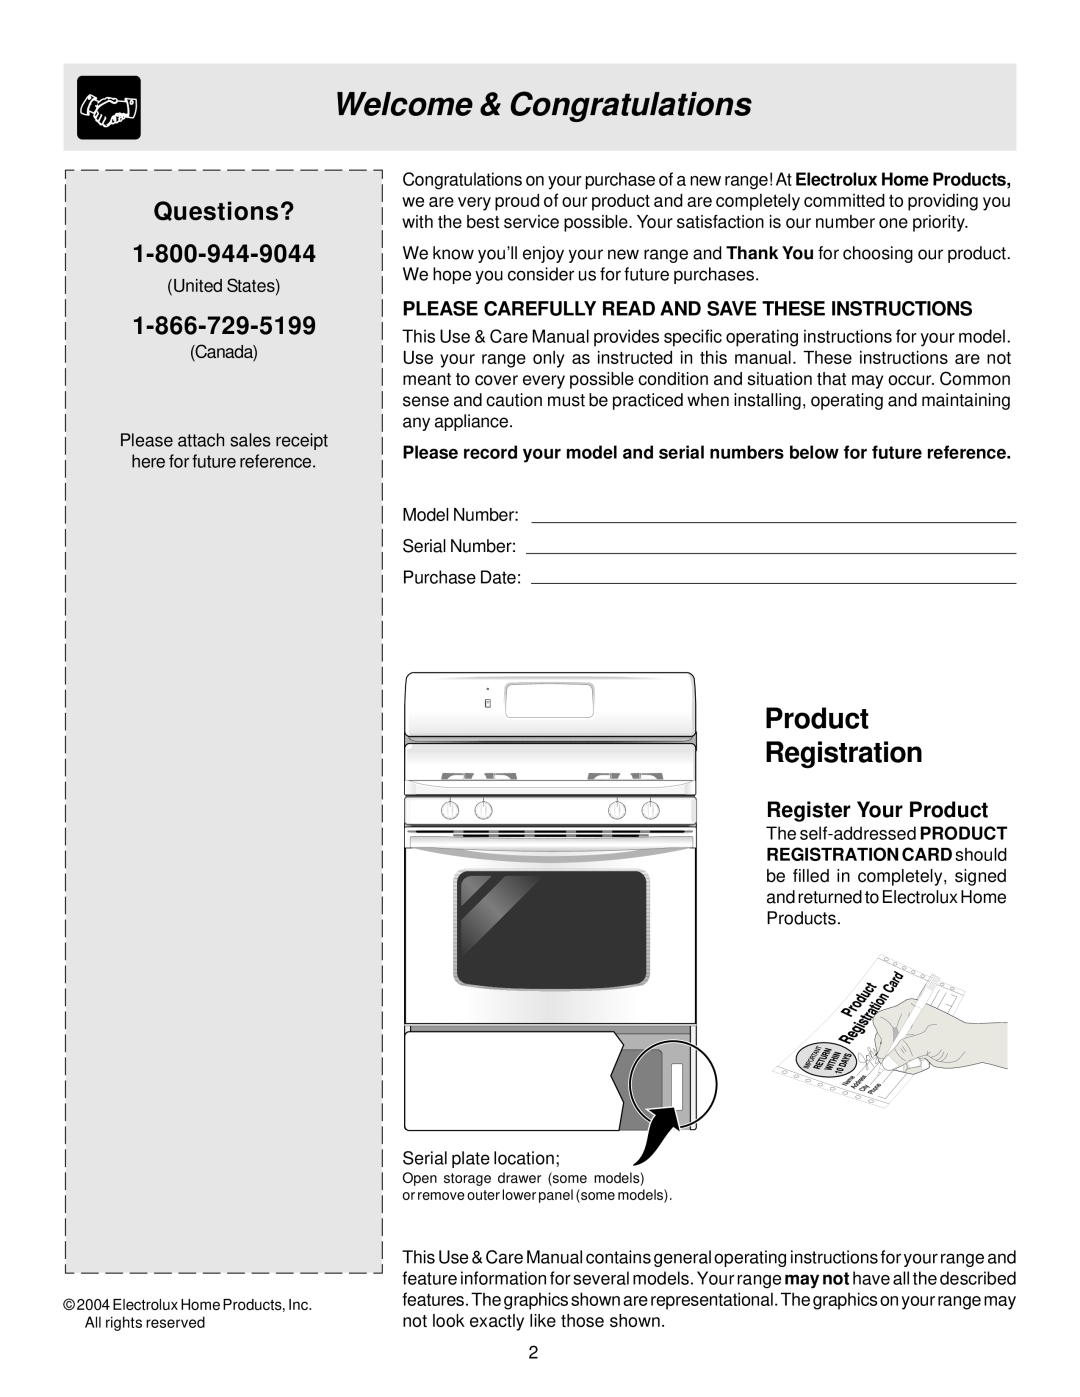 Frigidaire ES300 manual Welcome & Congratulations, Questions?, Register Your Product, Product Registration 